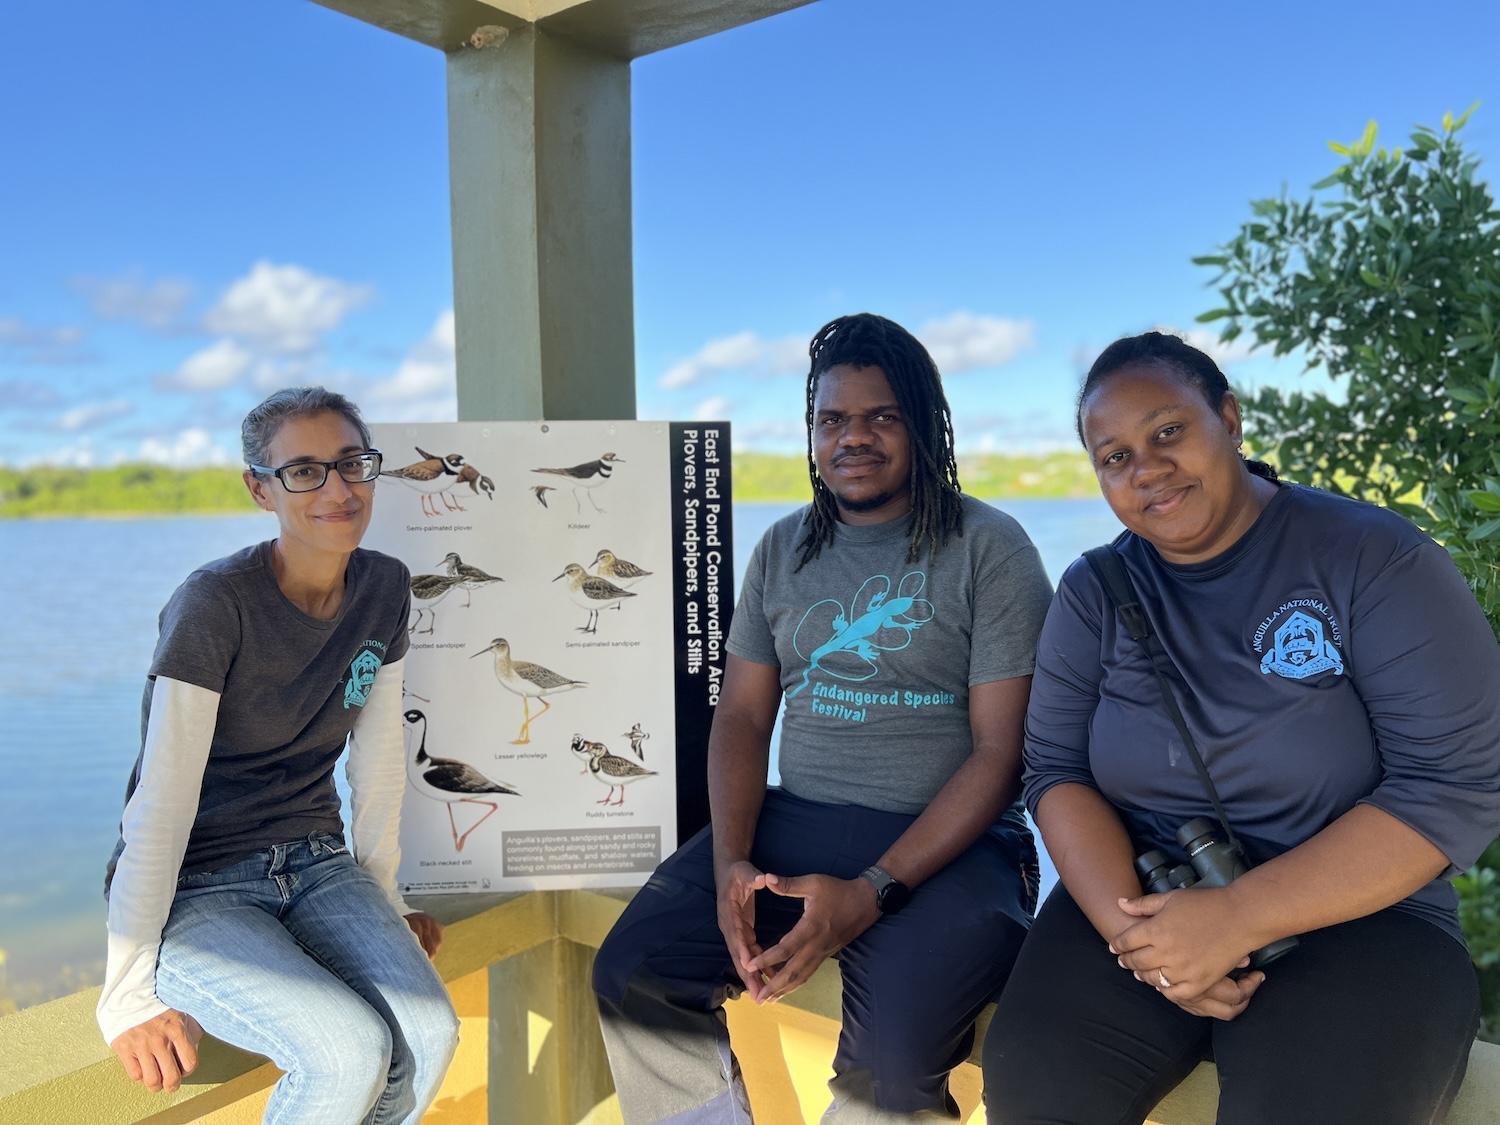 Farah Mukhida, Devon Carter and Clarissa Lloyd from the Anguilla National Trust are shown at the East End Pond Conservation Area.